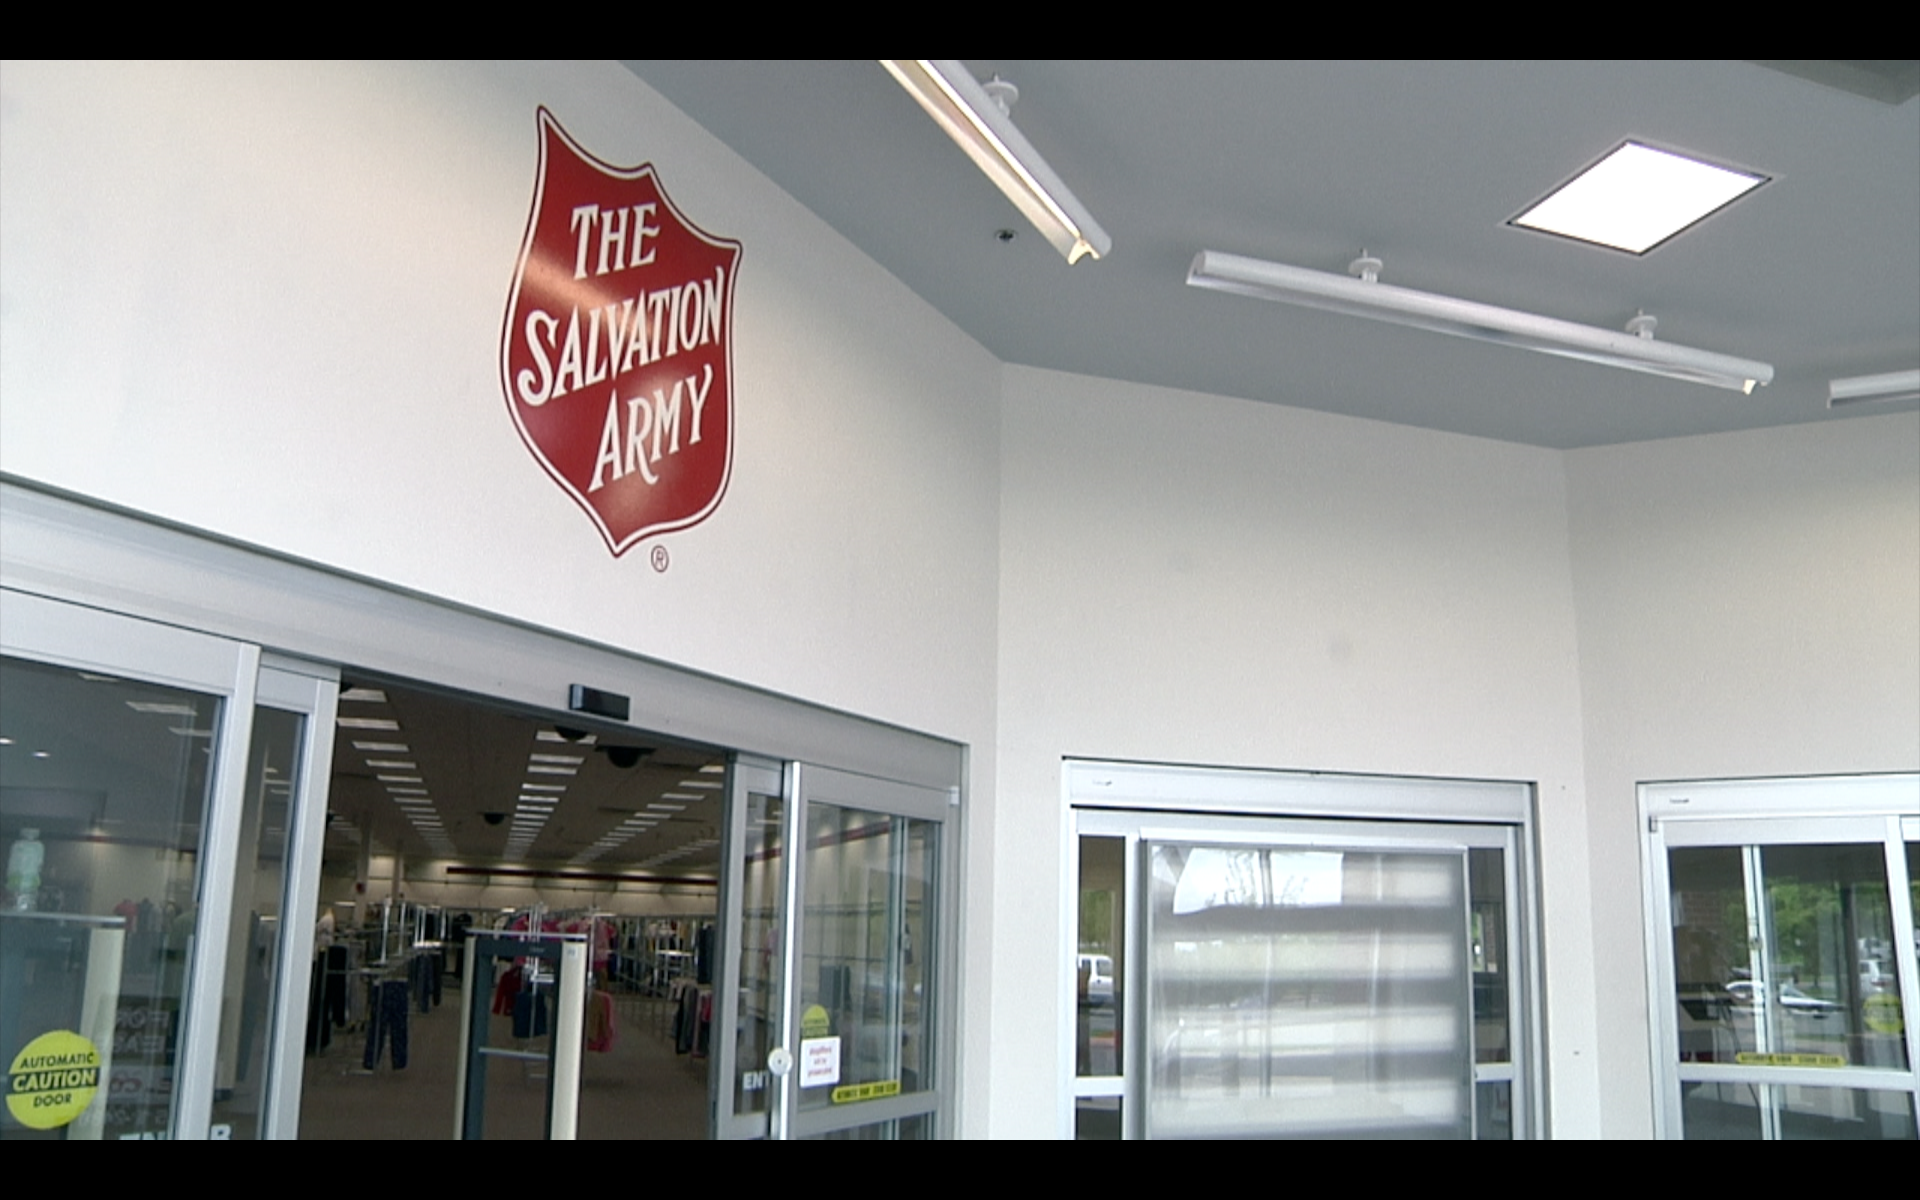 New Salvation Army taking over Old 
Circuit City